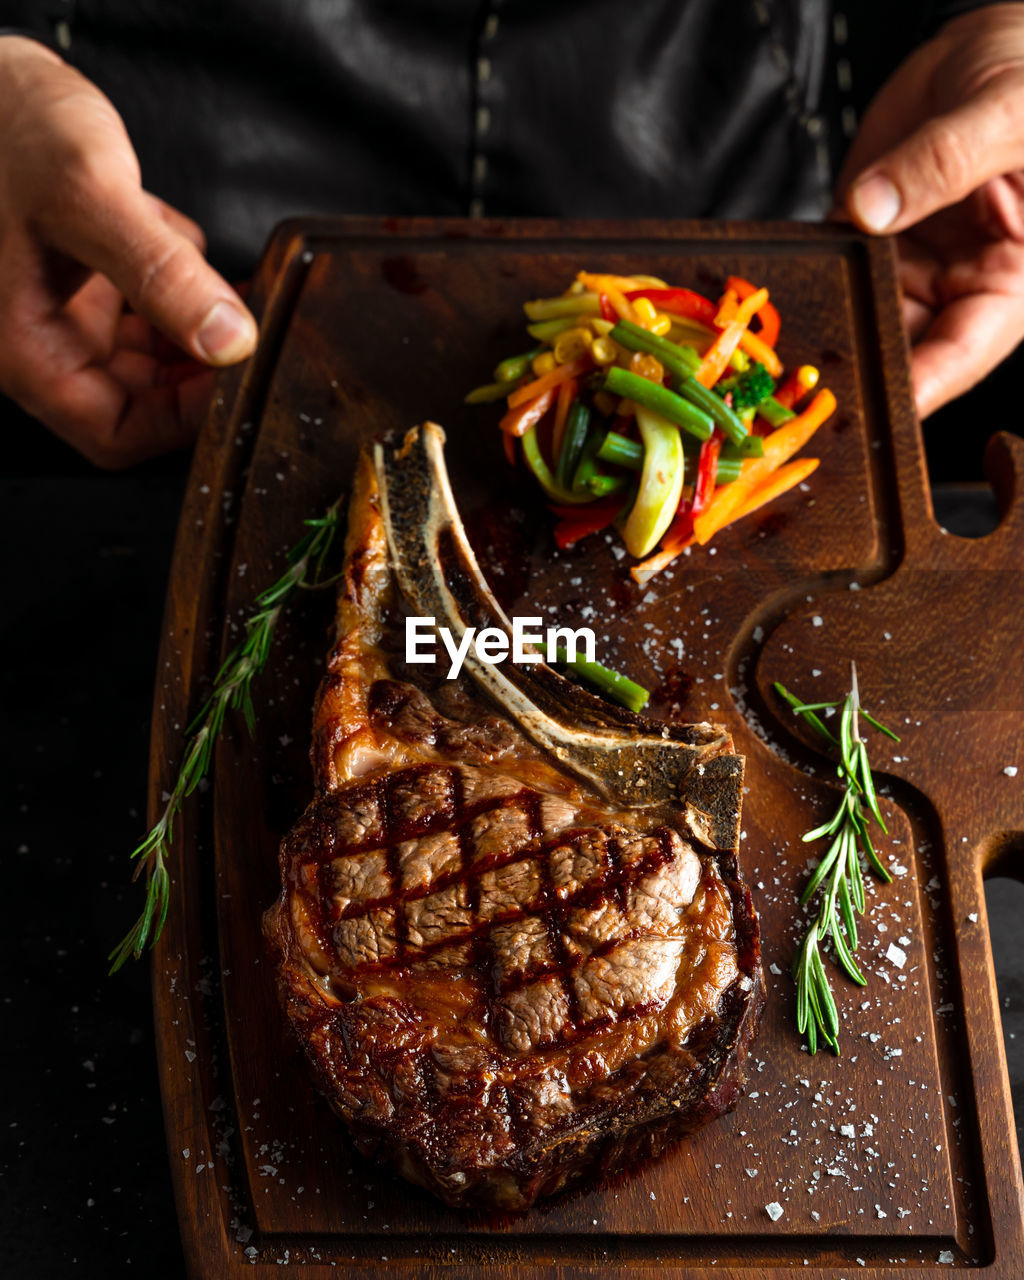 Chef offering grilled steak and veggies dish served on a wooden board, low key image